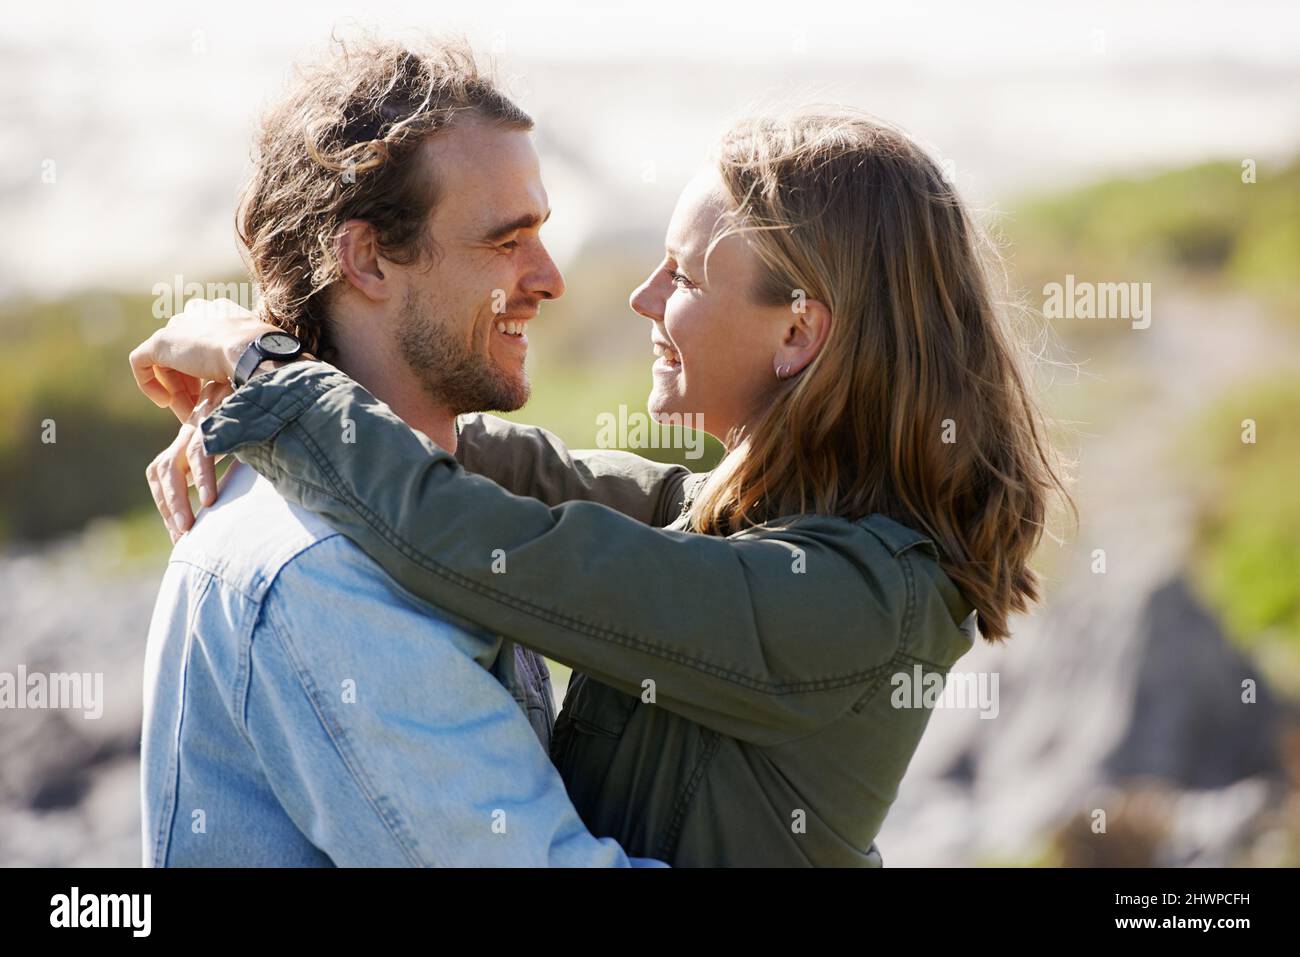 Just loving their romantic getaway. Shot of an affectionate young couple standing face to face in the outdoors. Stock Photo